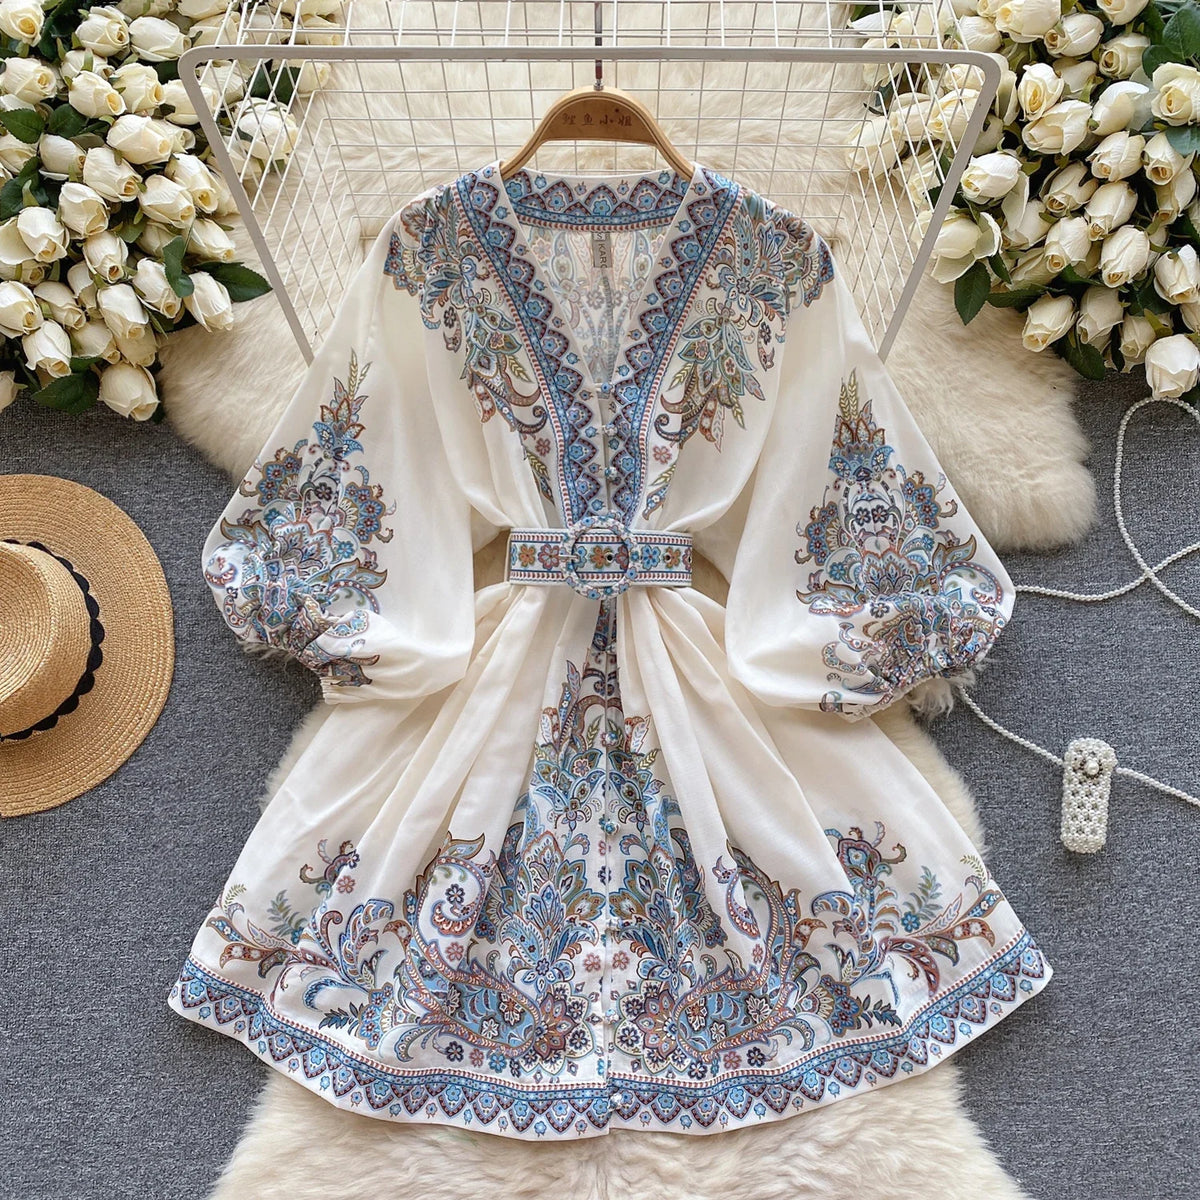 French Print V-neck Belt Puff Sleeve Long Sleeve Single Breasted Dress A-line Casual Women Fashion